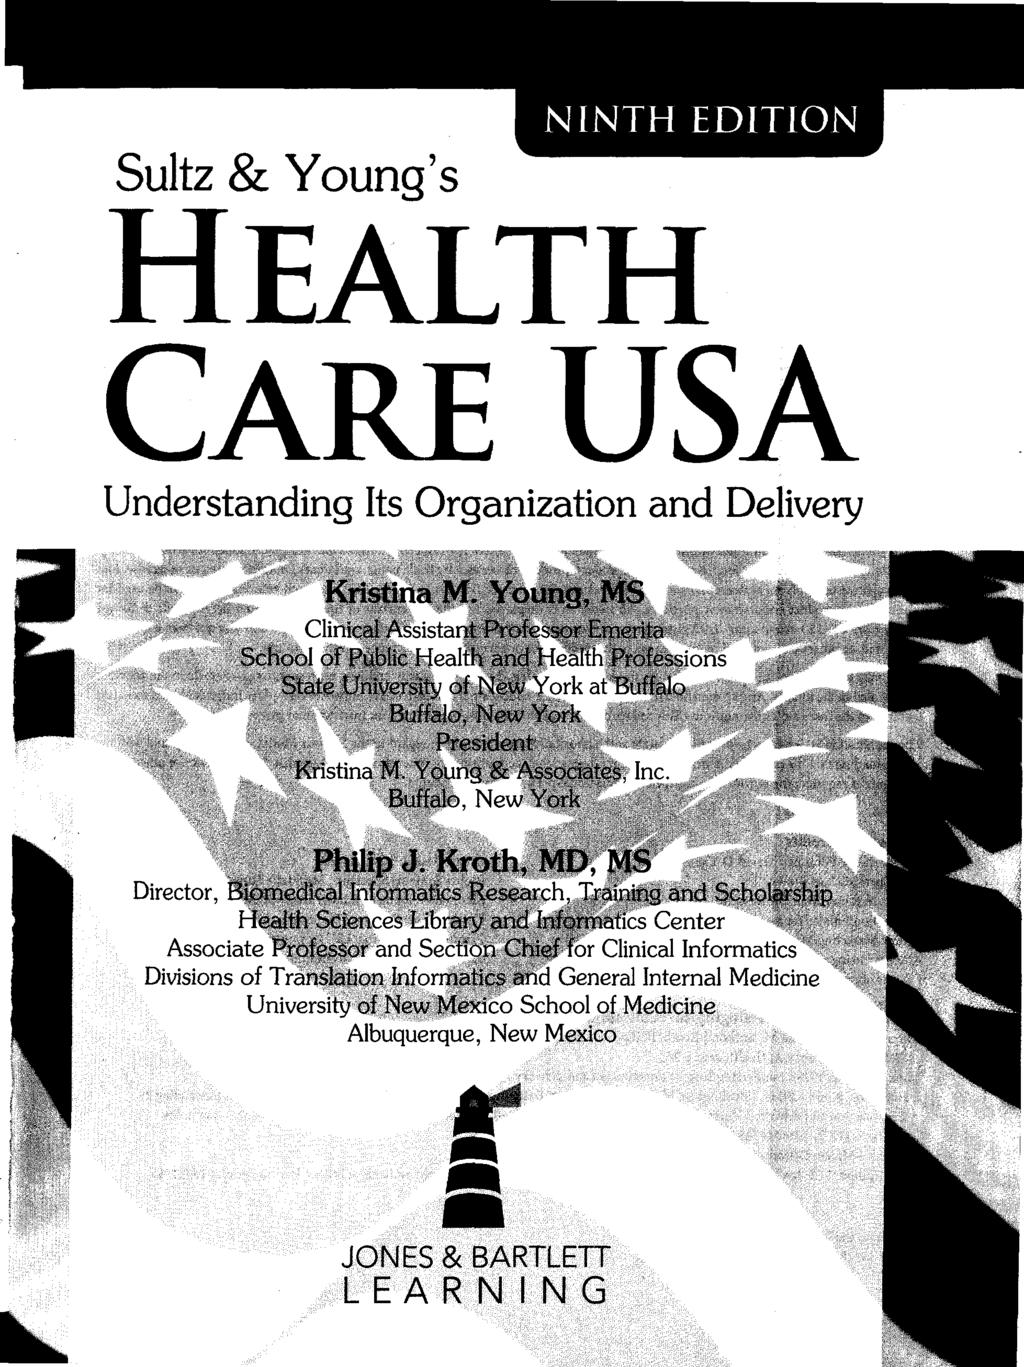 NINTH EDITION Sultz & Young's HEALTH CARE USA Understanding Its Organization and Delivery Kristina M.